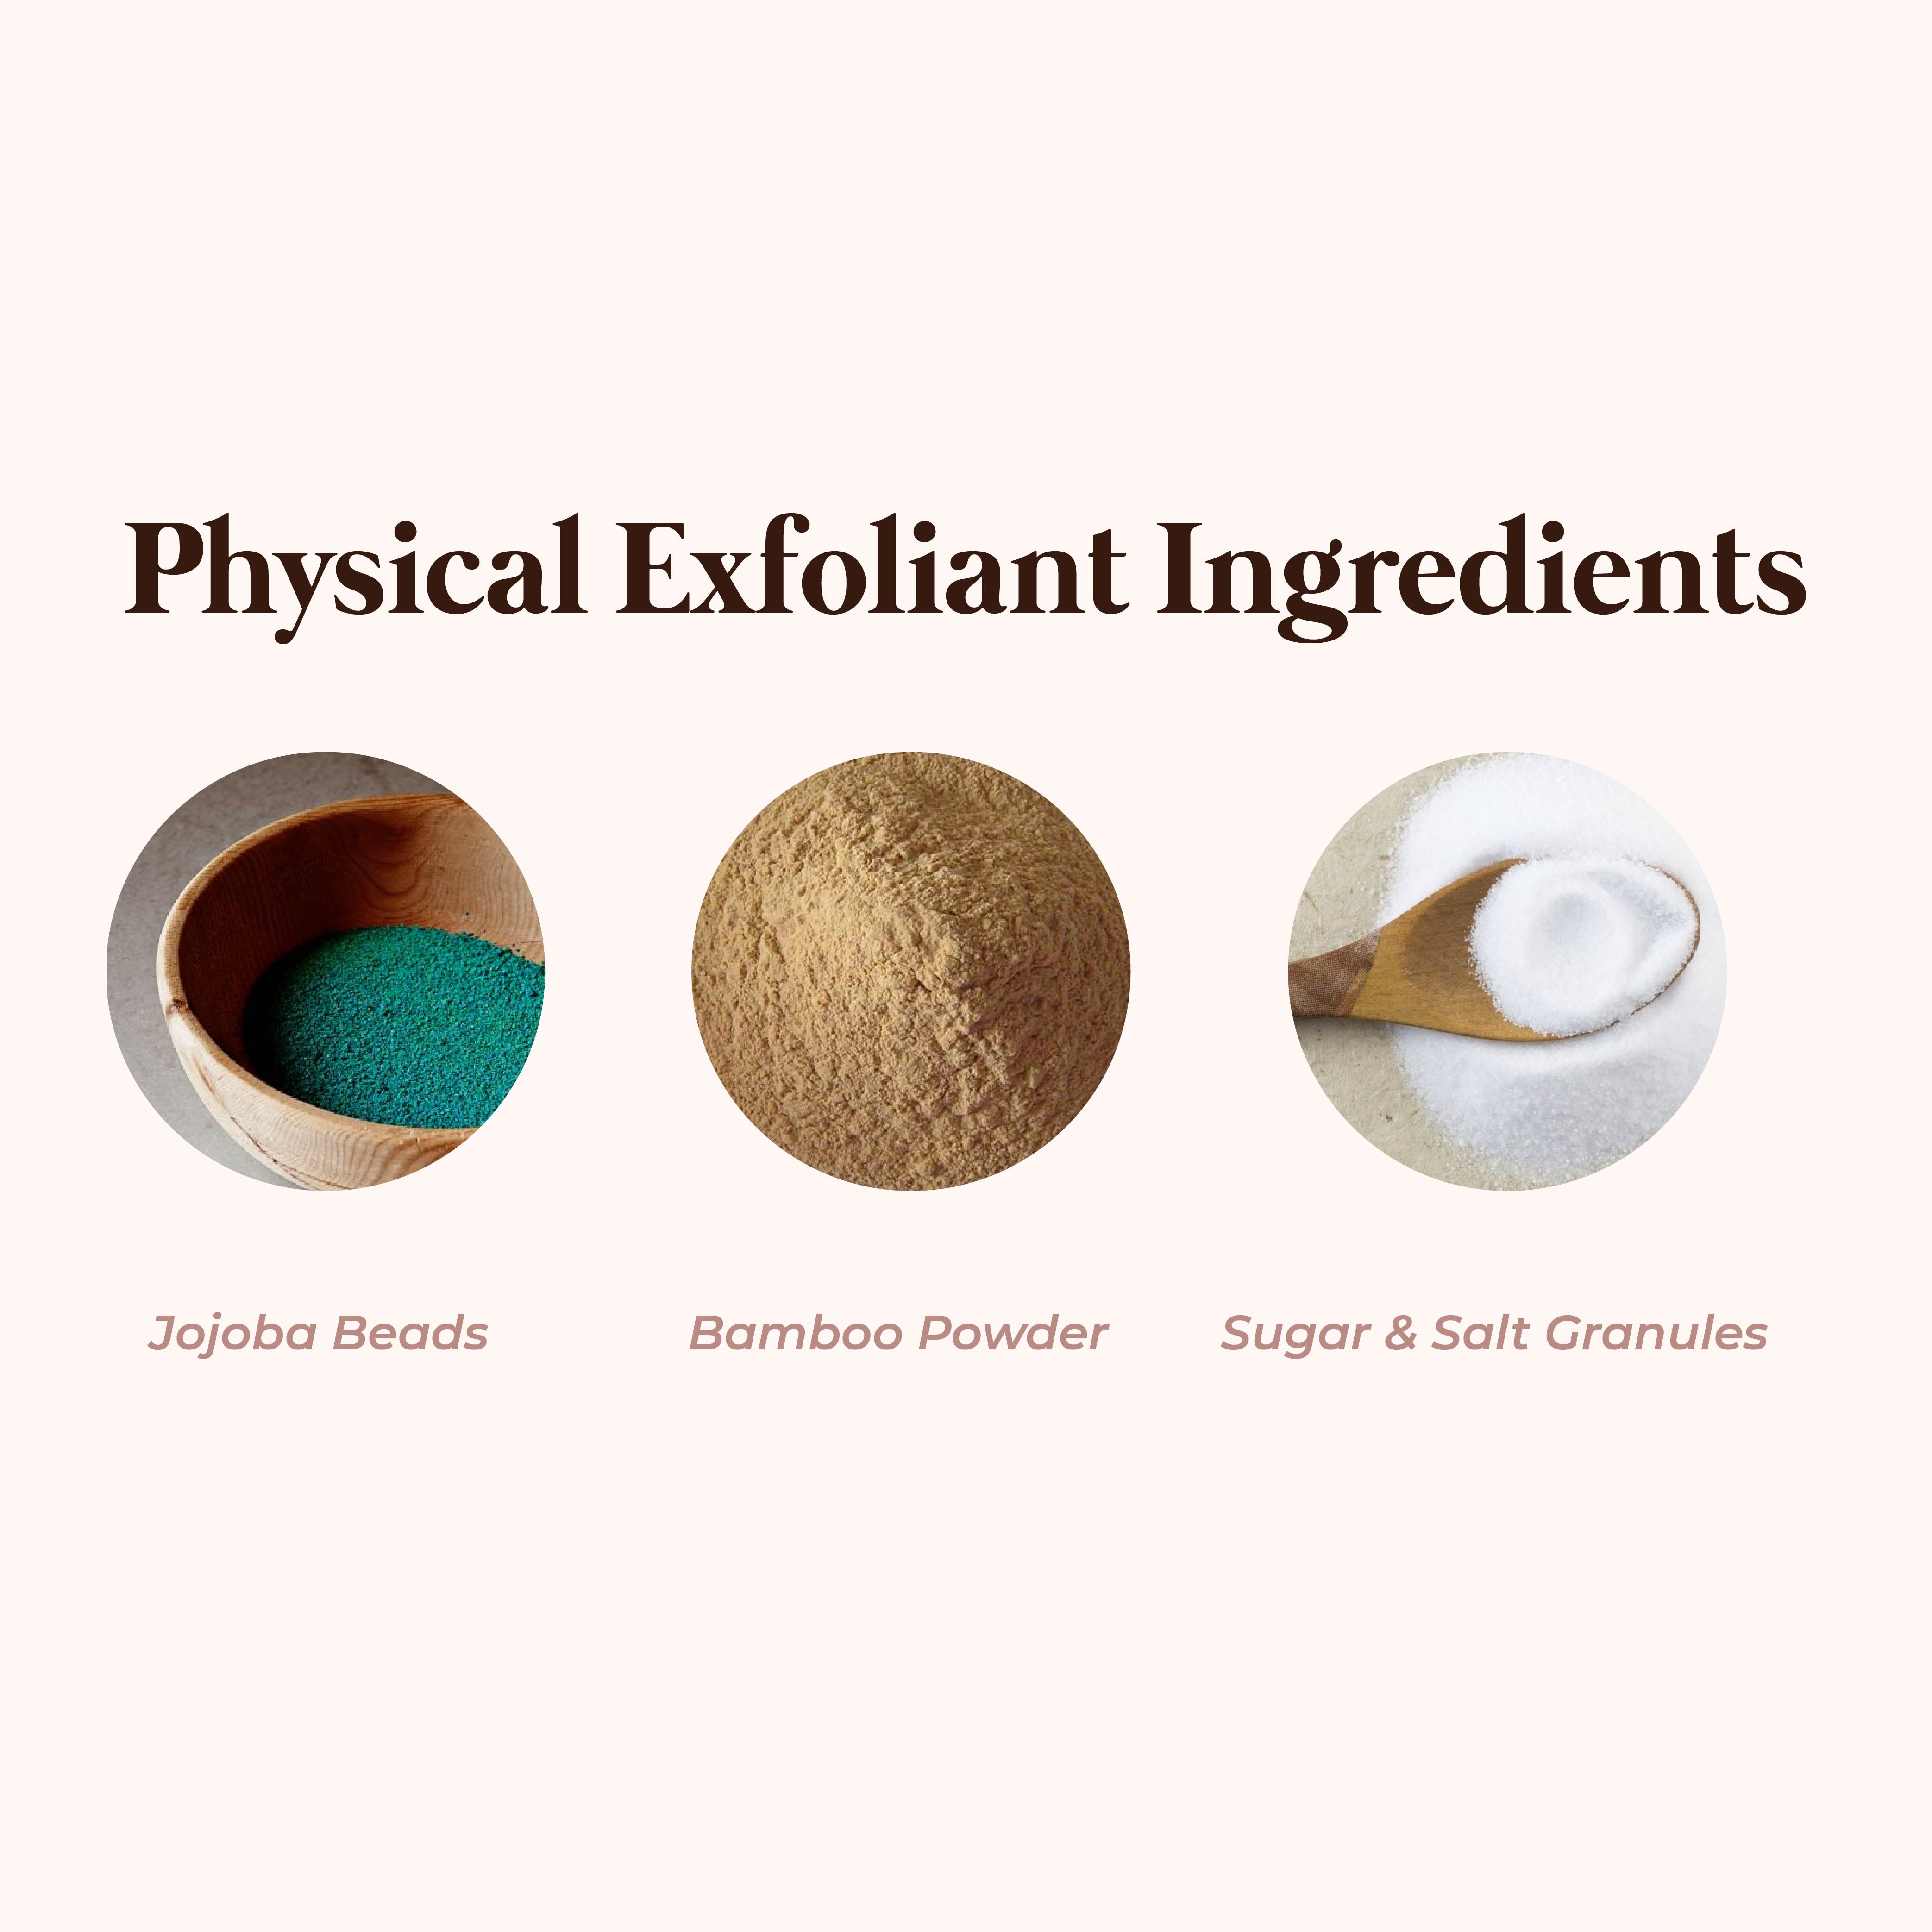 This is an image of the different physical exfoliants on www.sublimelife.in